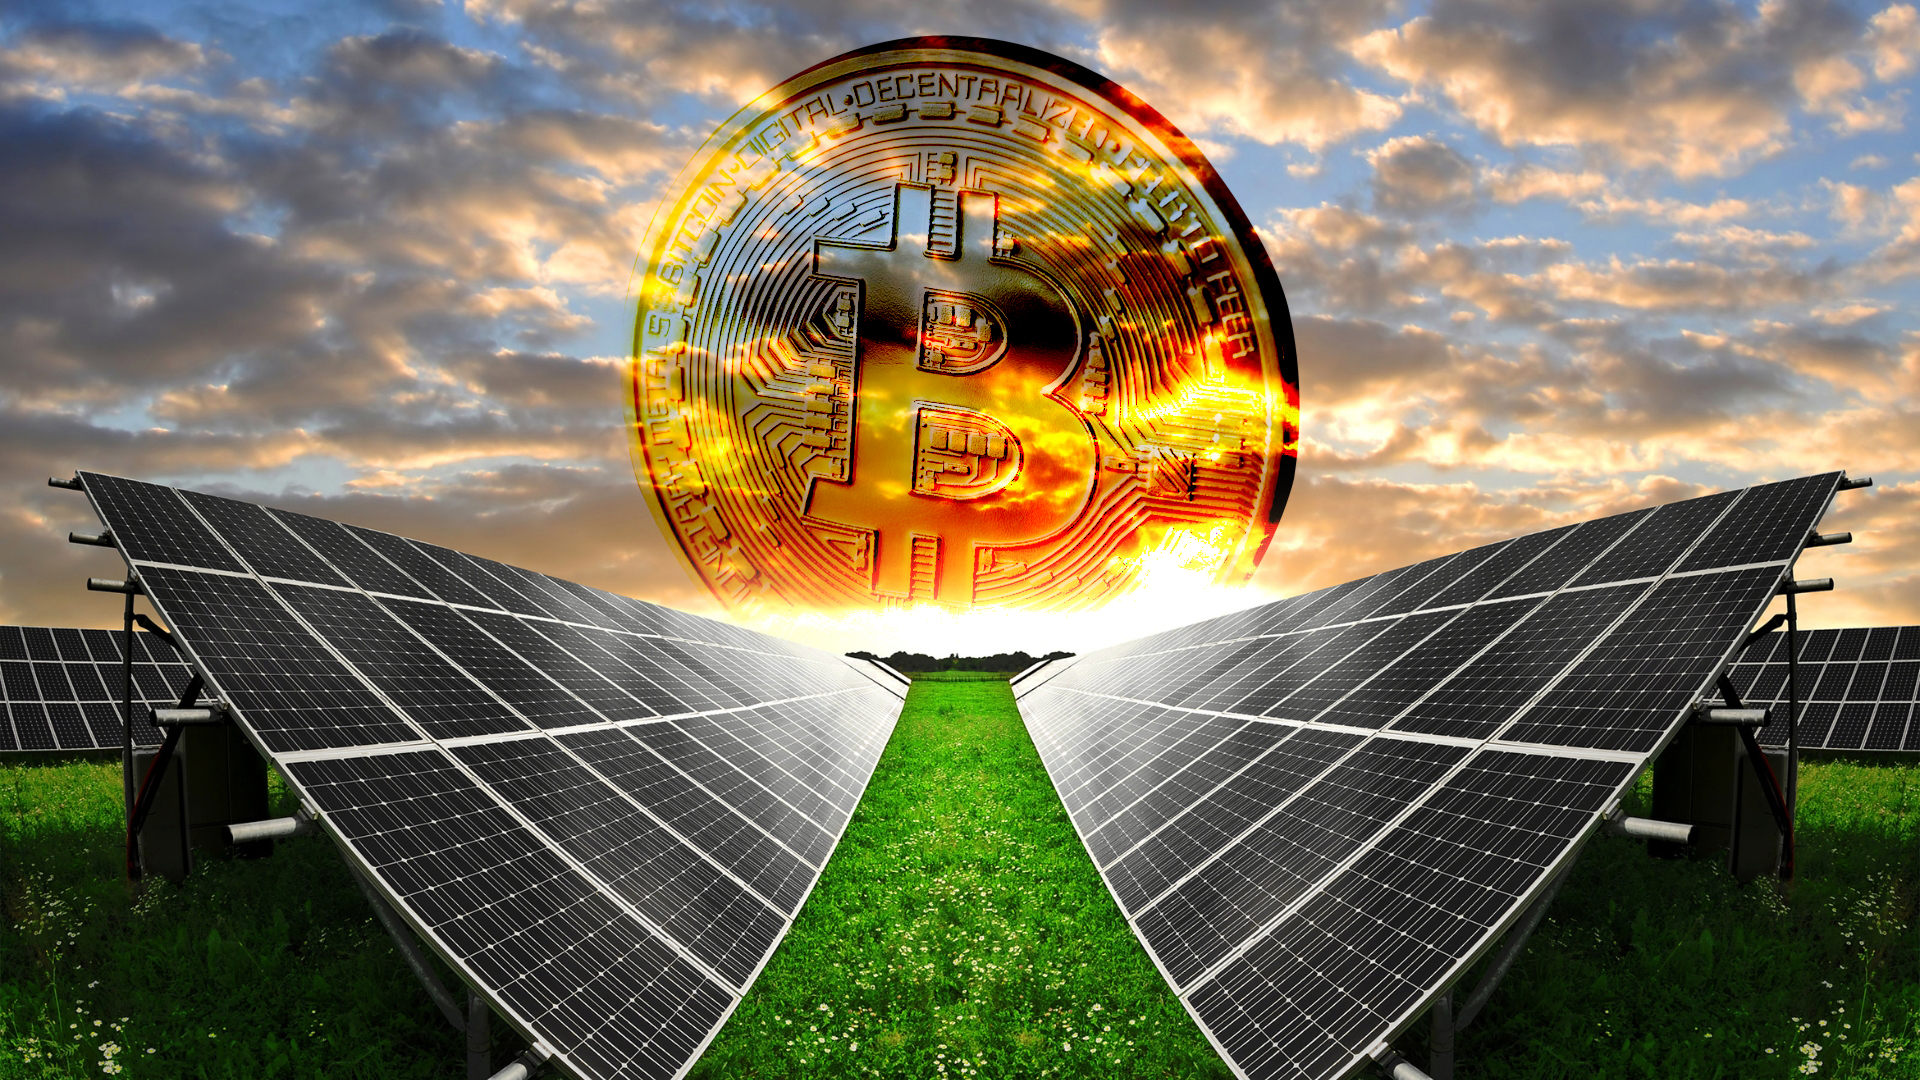 Examining Bitcoin’s Energy Consumption: A Deep Dive into the Network’s Power Usage